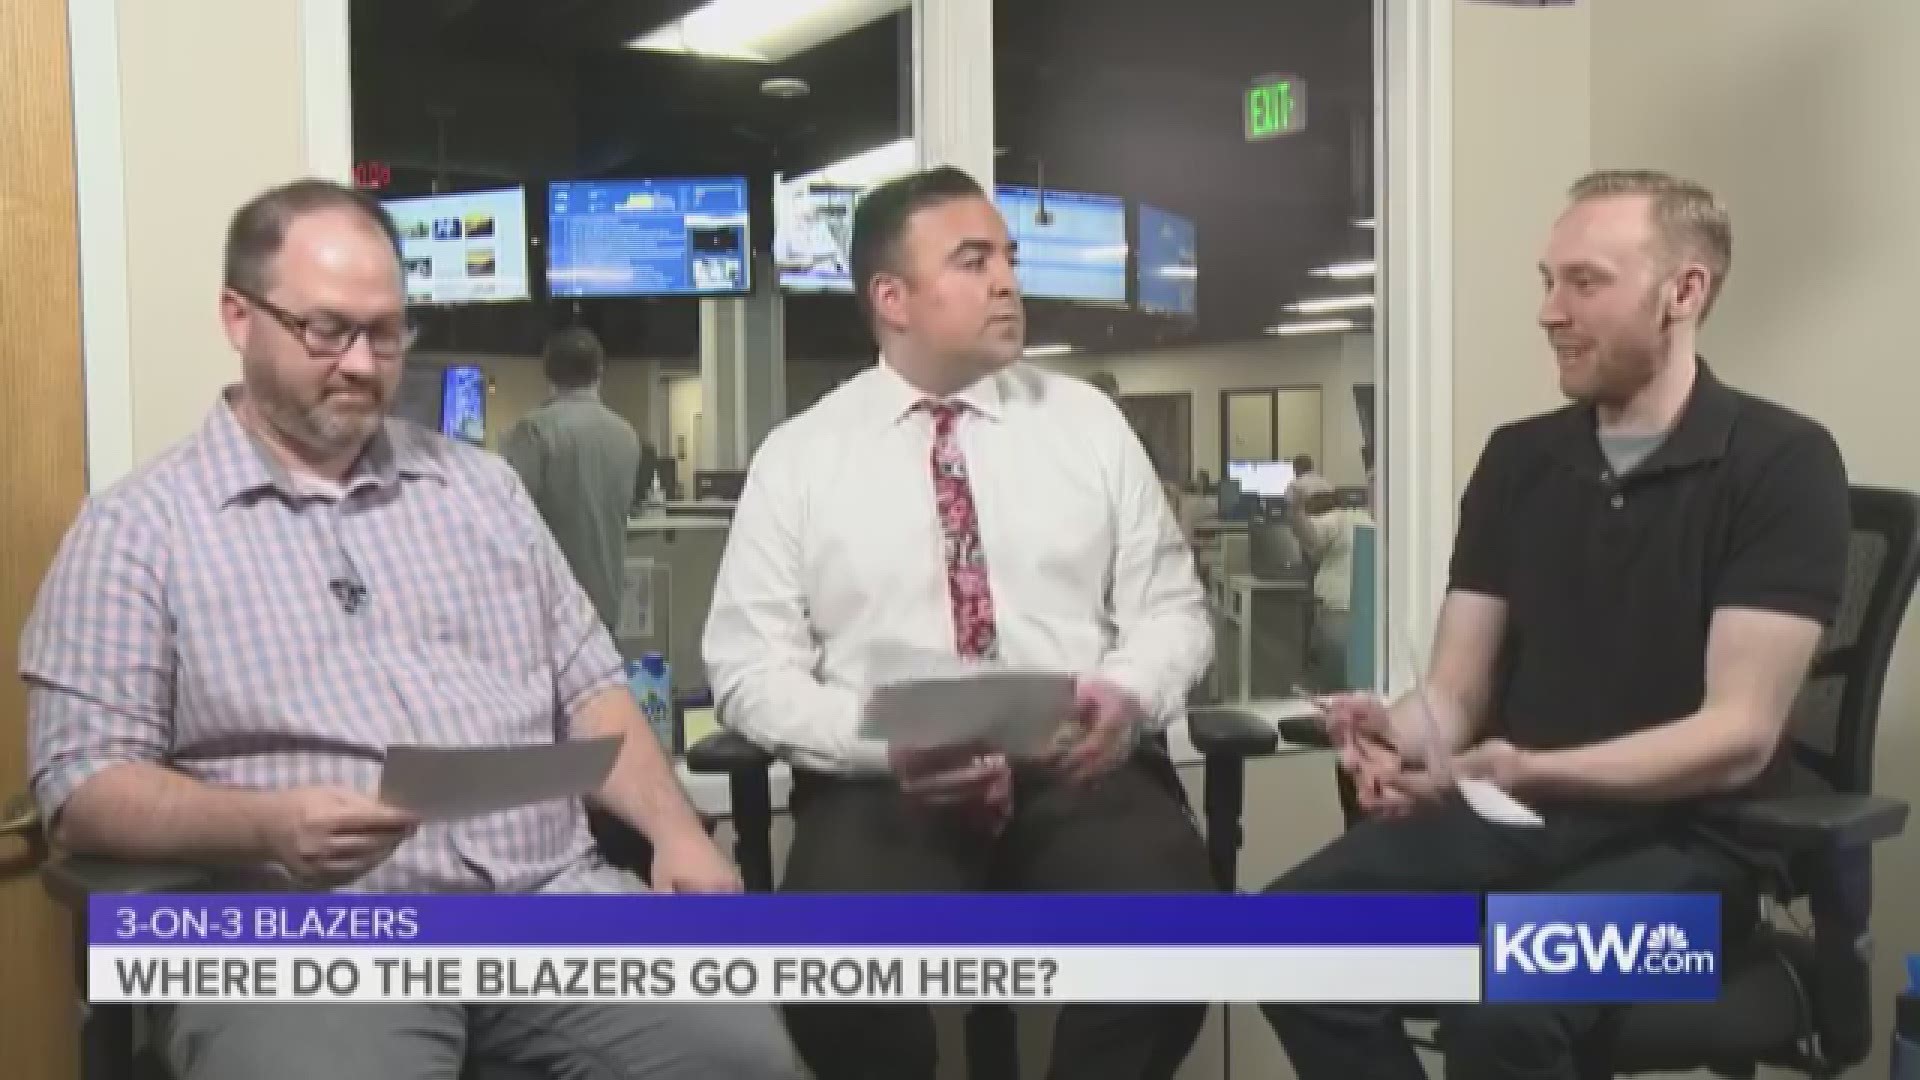 KGW's Jared Cowley, Orlando Sanchez and Nate Hanson debate whether the 2017-18 season was a success for the Blazers.